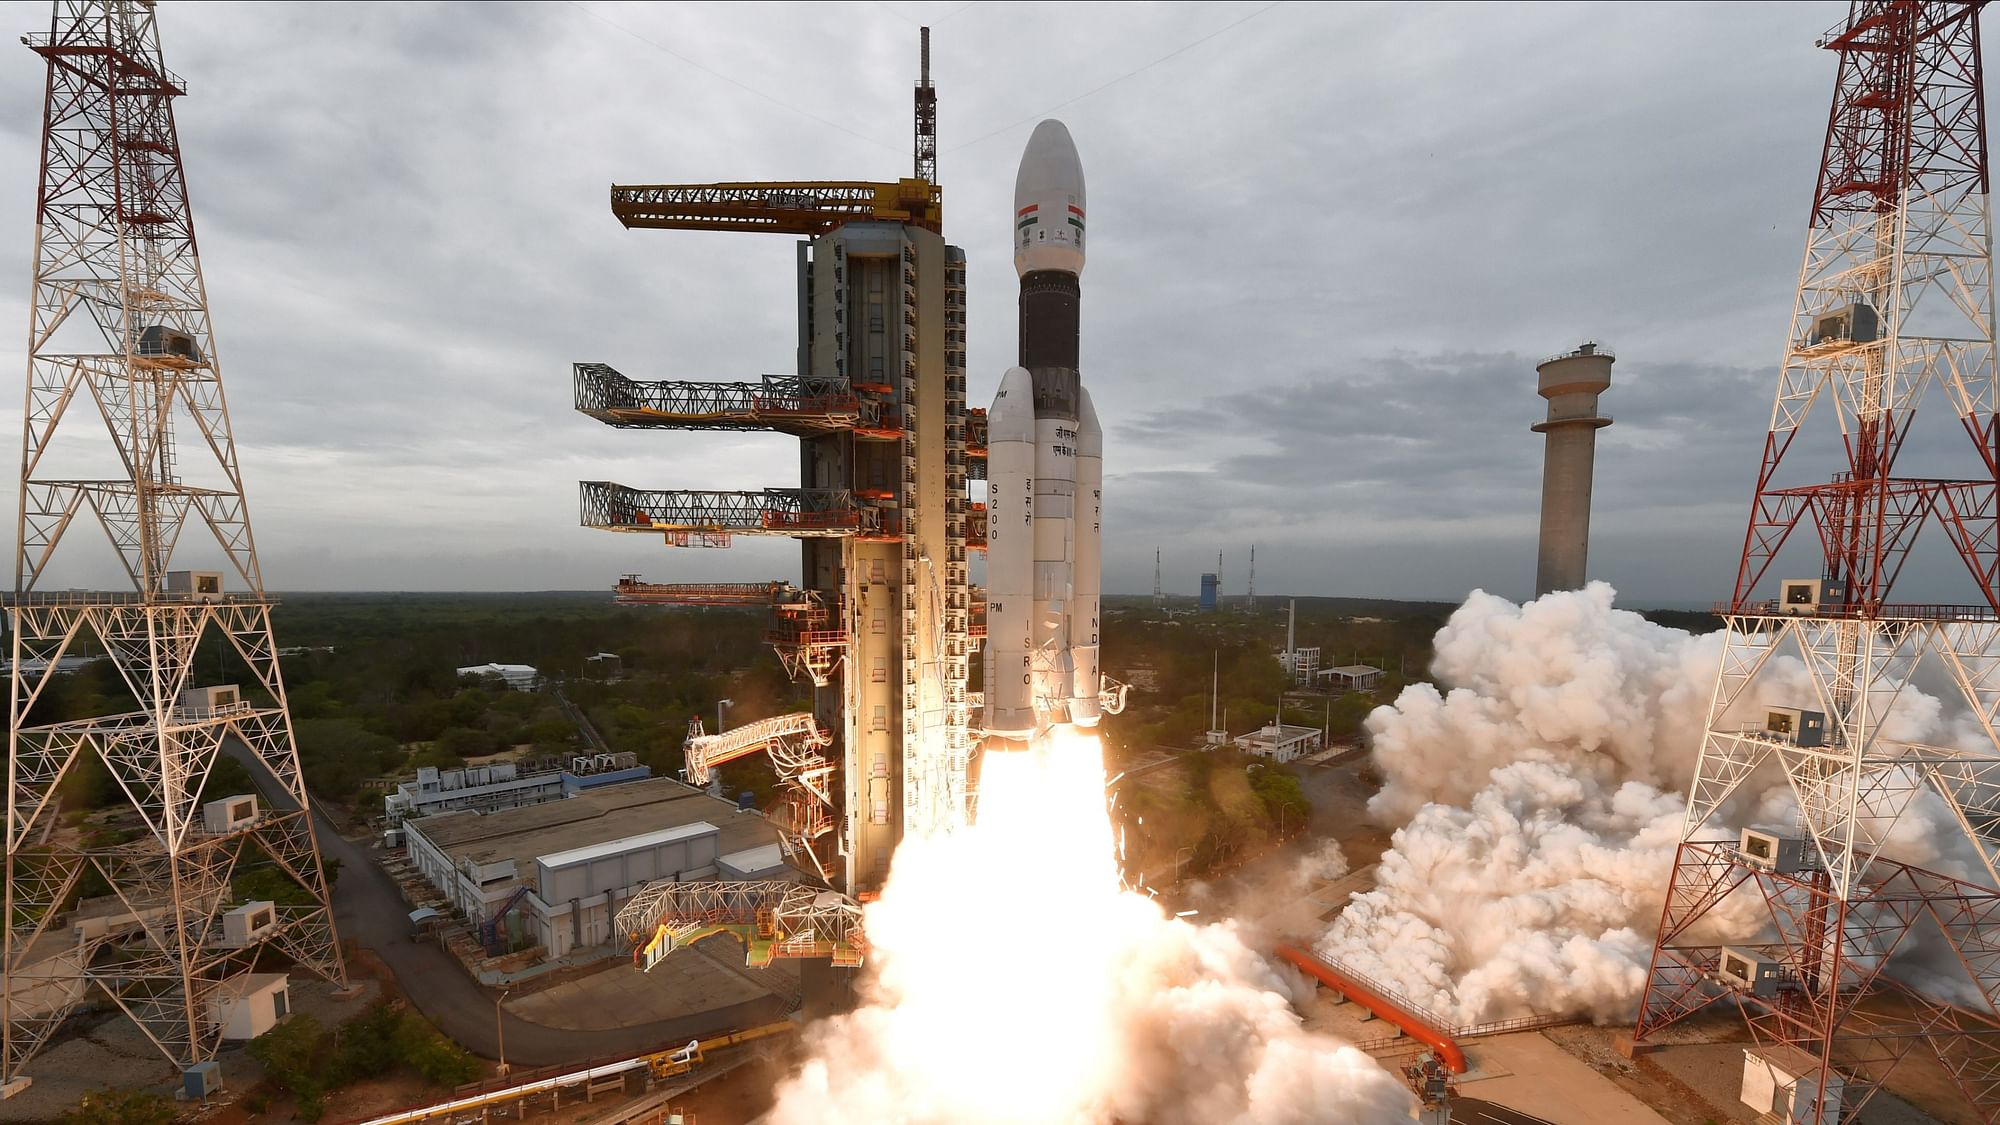 Chandrayaan-2 carried out the ‘Trans Lunar Insertion’ (TLI) maneuver at 2:21 am on Wednesday.